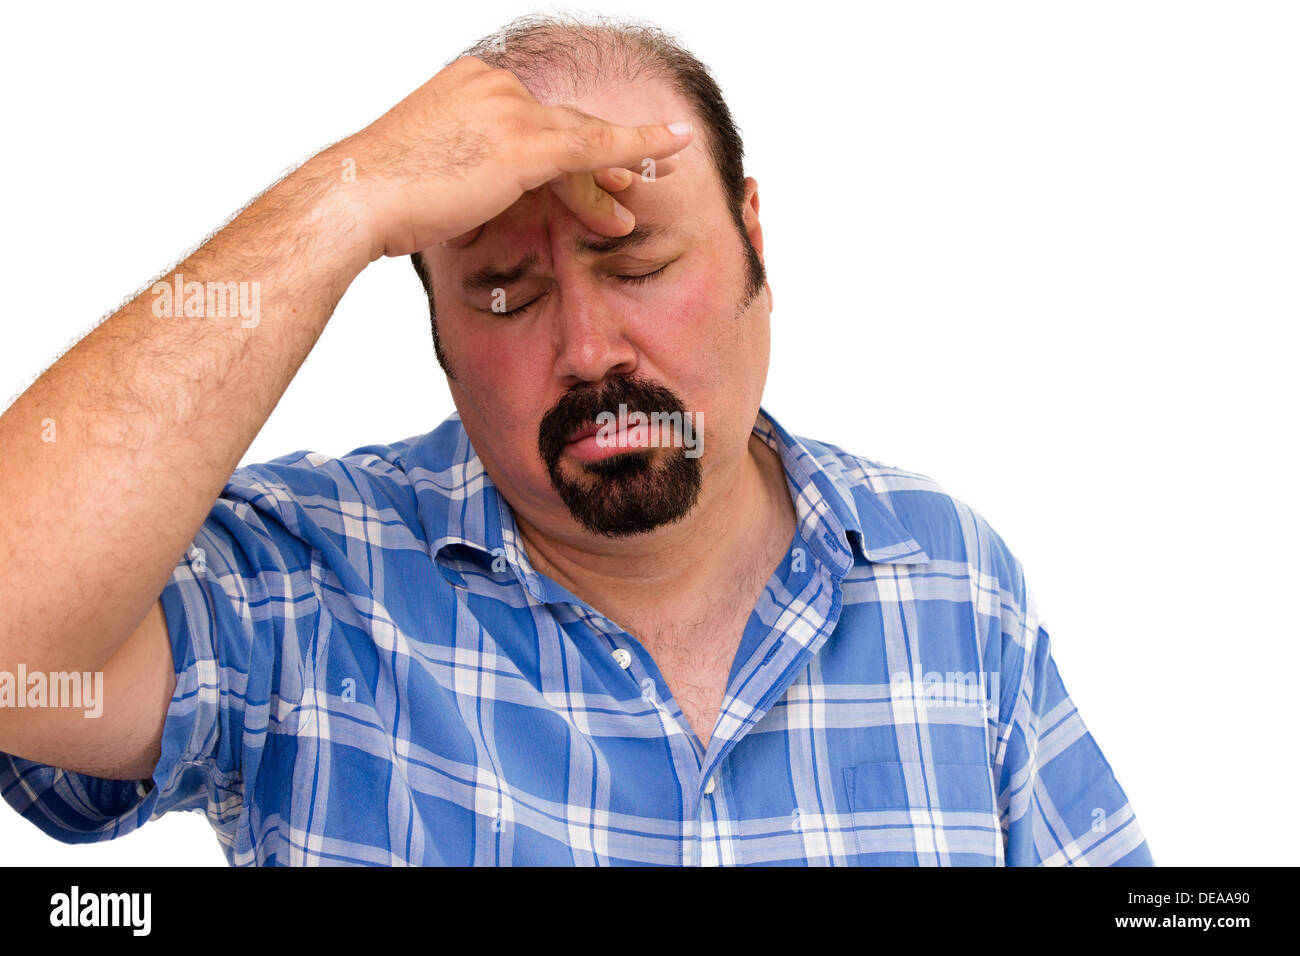 Man looking worried with hand on forehead isolated on white Stock Photo